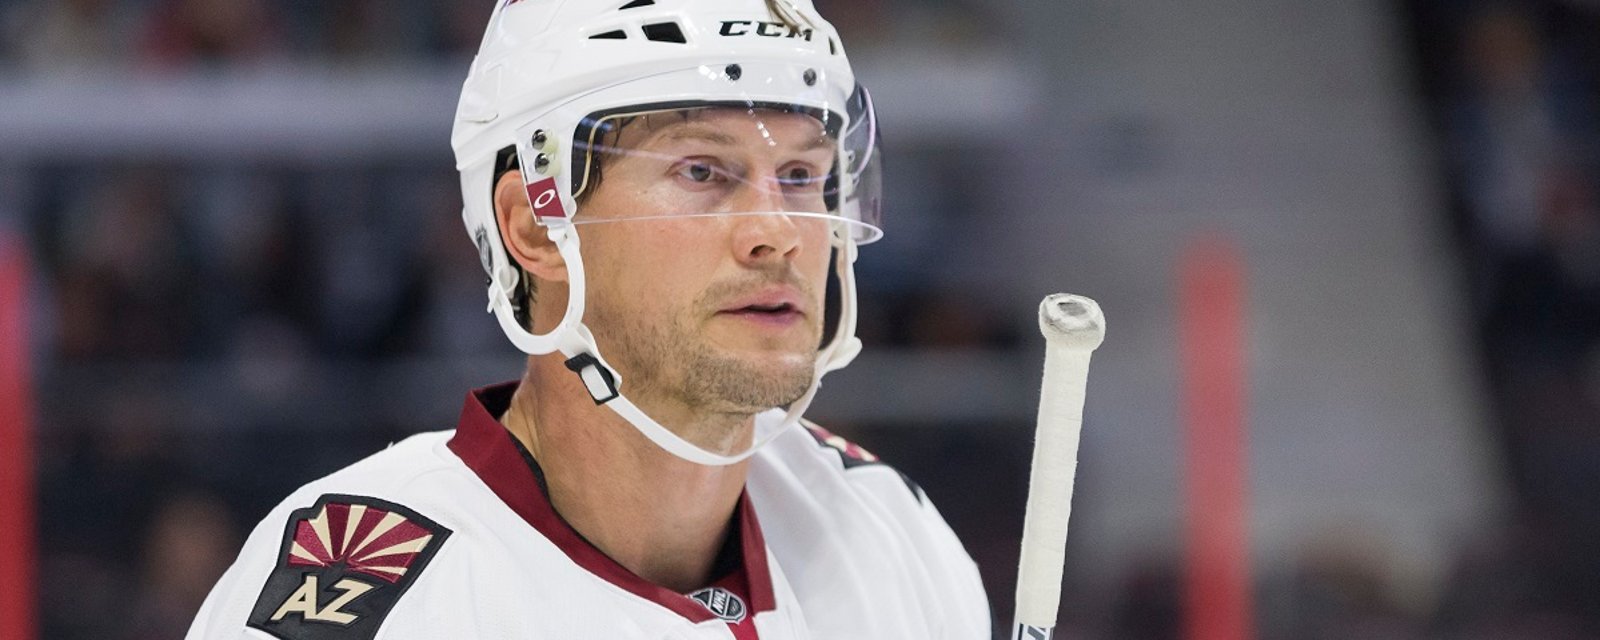 Breaking: Coyotes release statement after cutting their captain, get roasted by their fans.